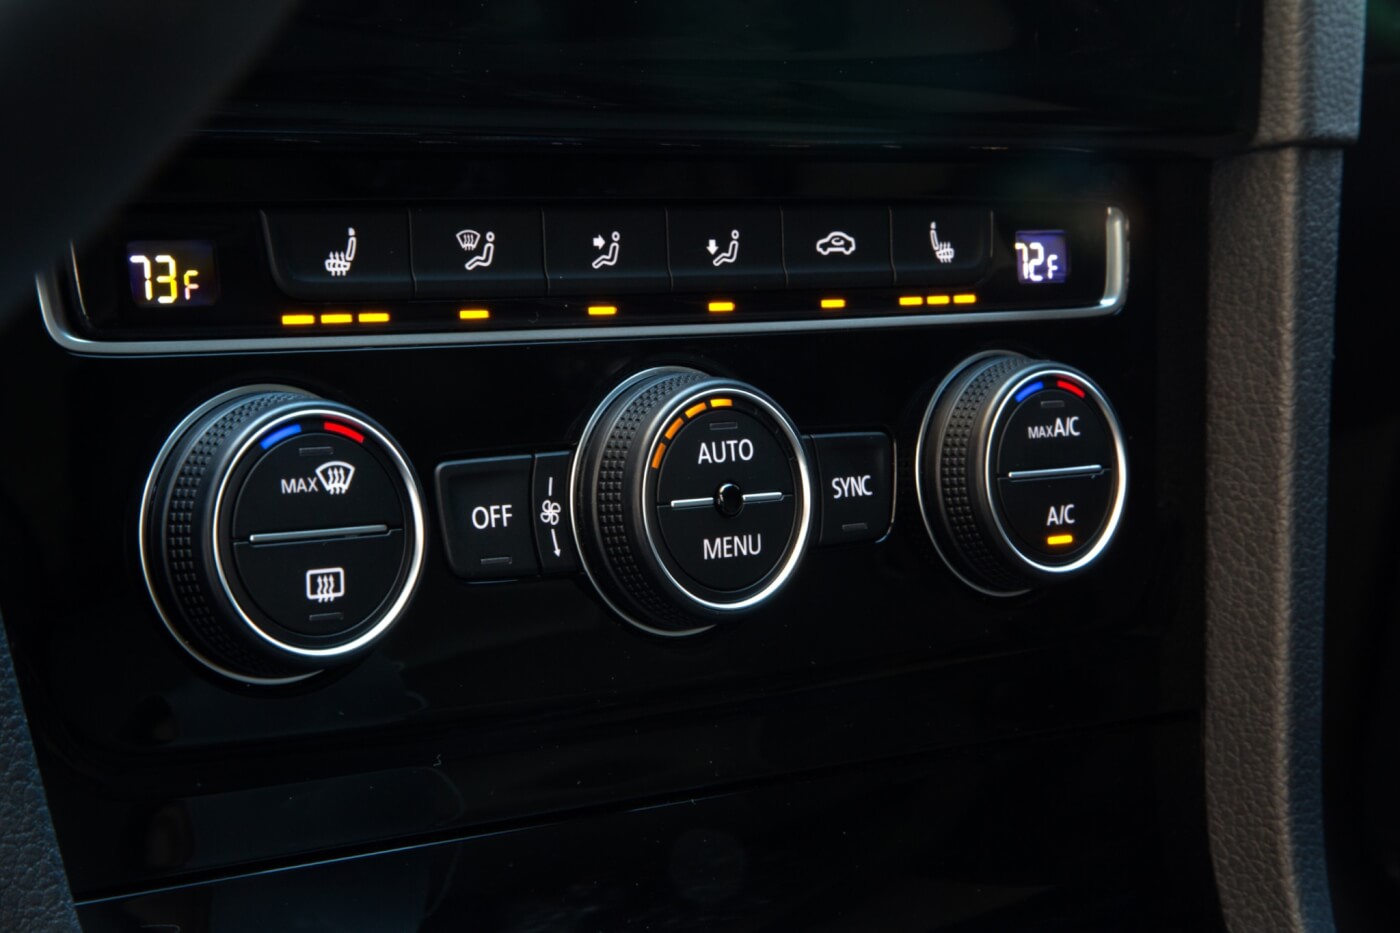 The climate control system is split to offer different levels of air temperature to the vents on each side of the passenger compartment. This potentially relationship-saving function is standard. The seats were also heated separately.